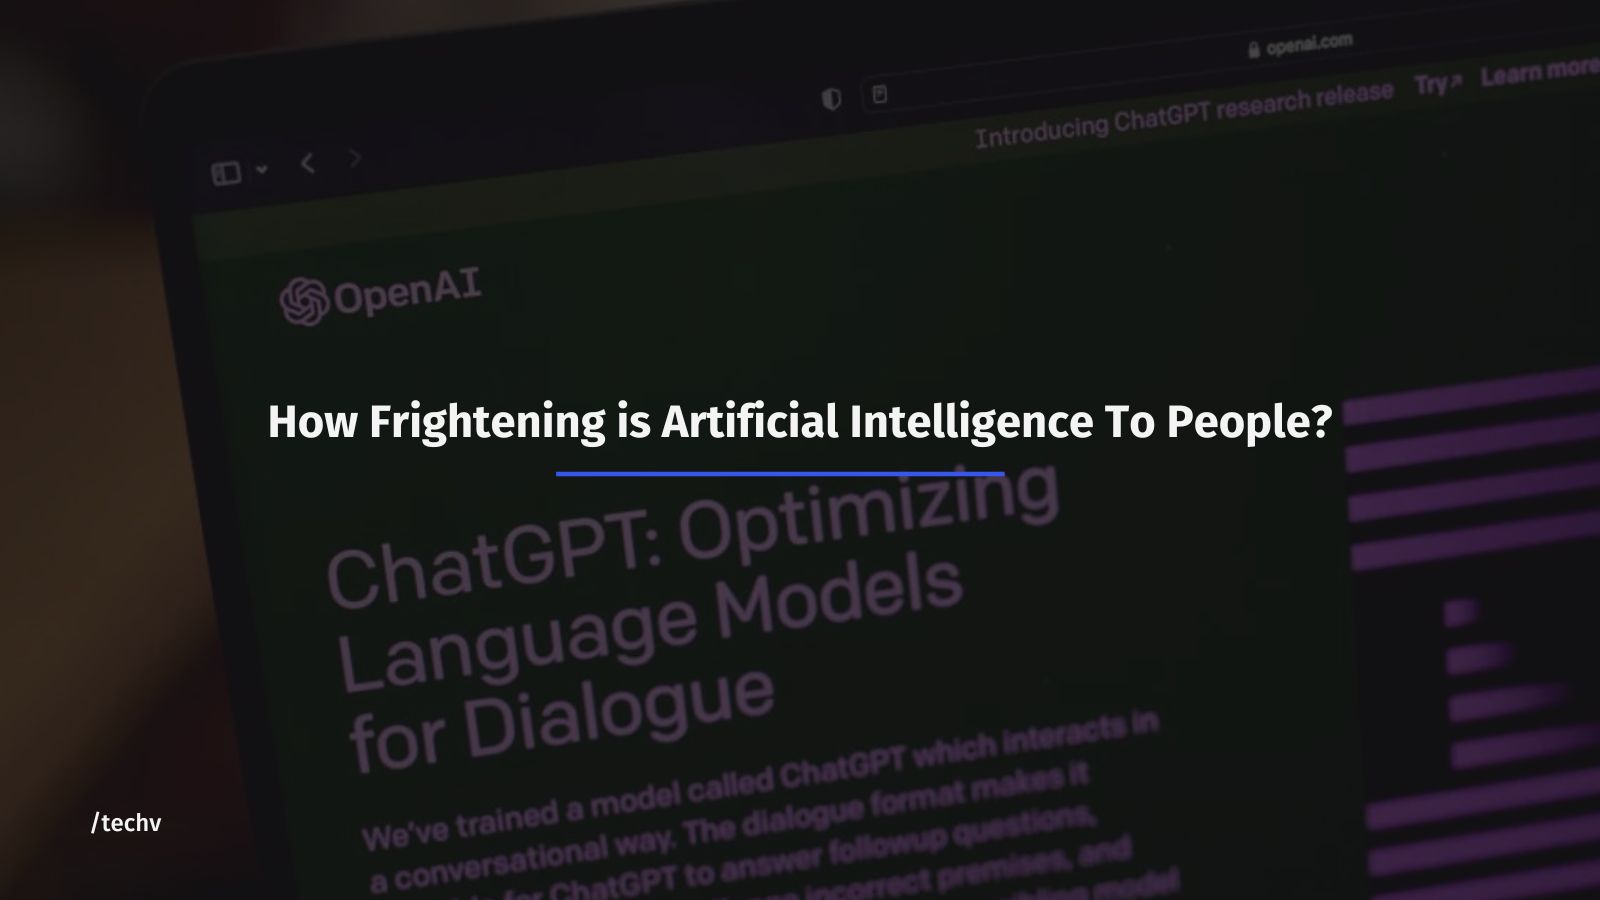 How frightening is artificial intelligence to people?